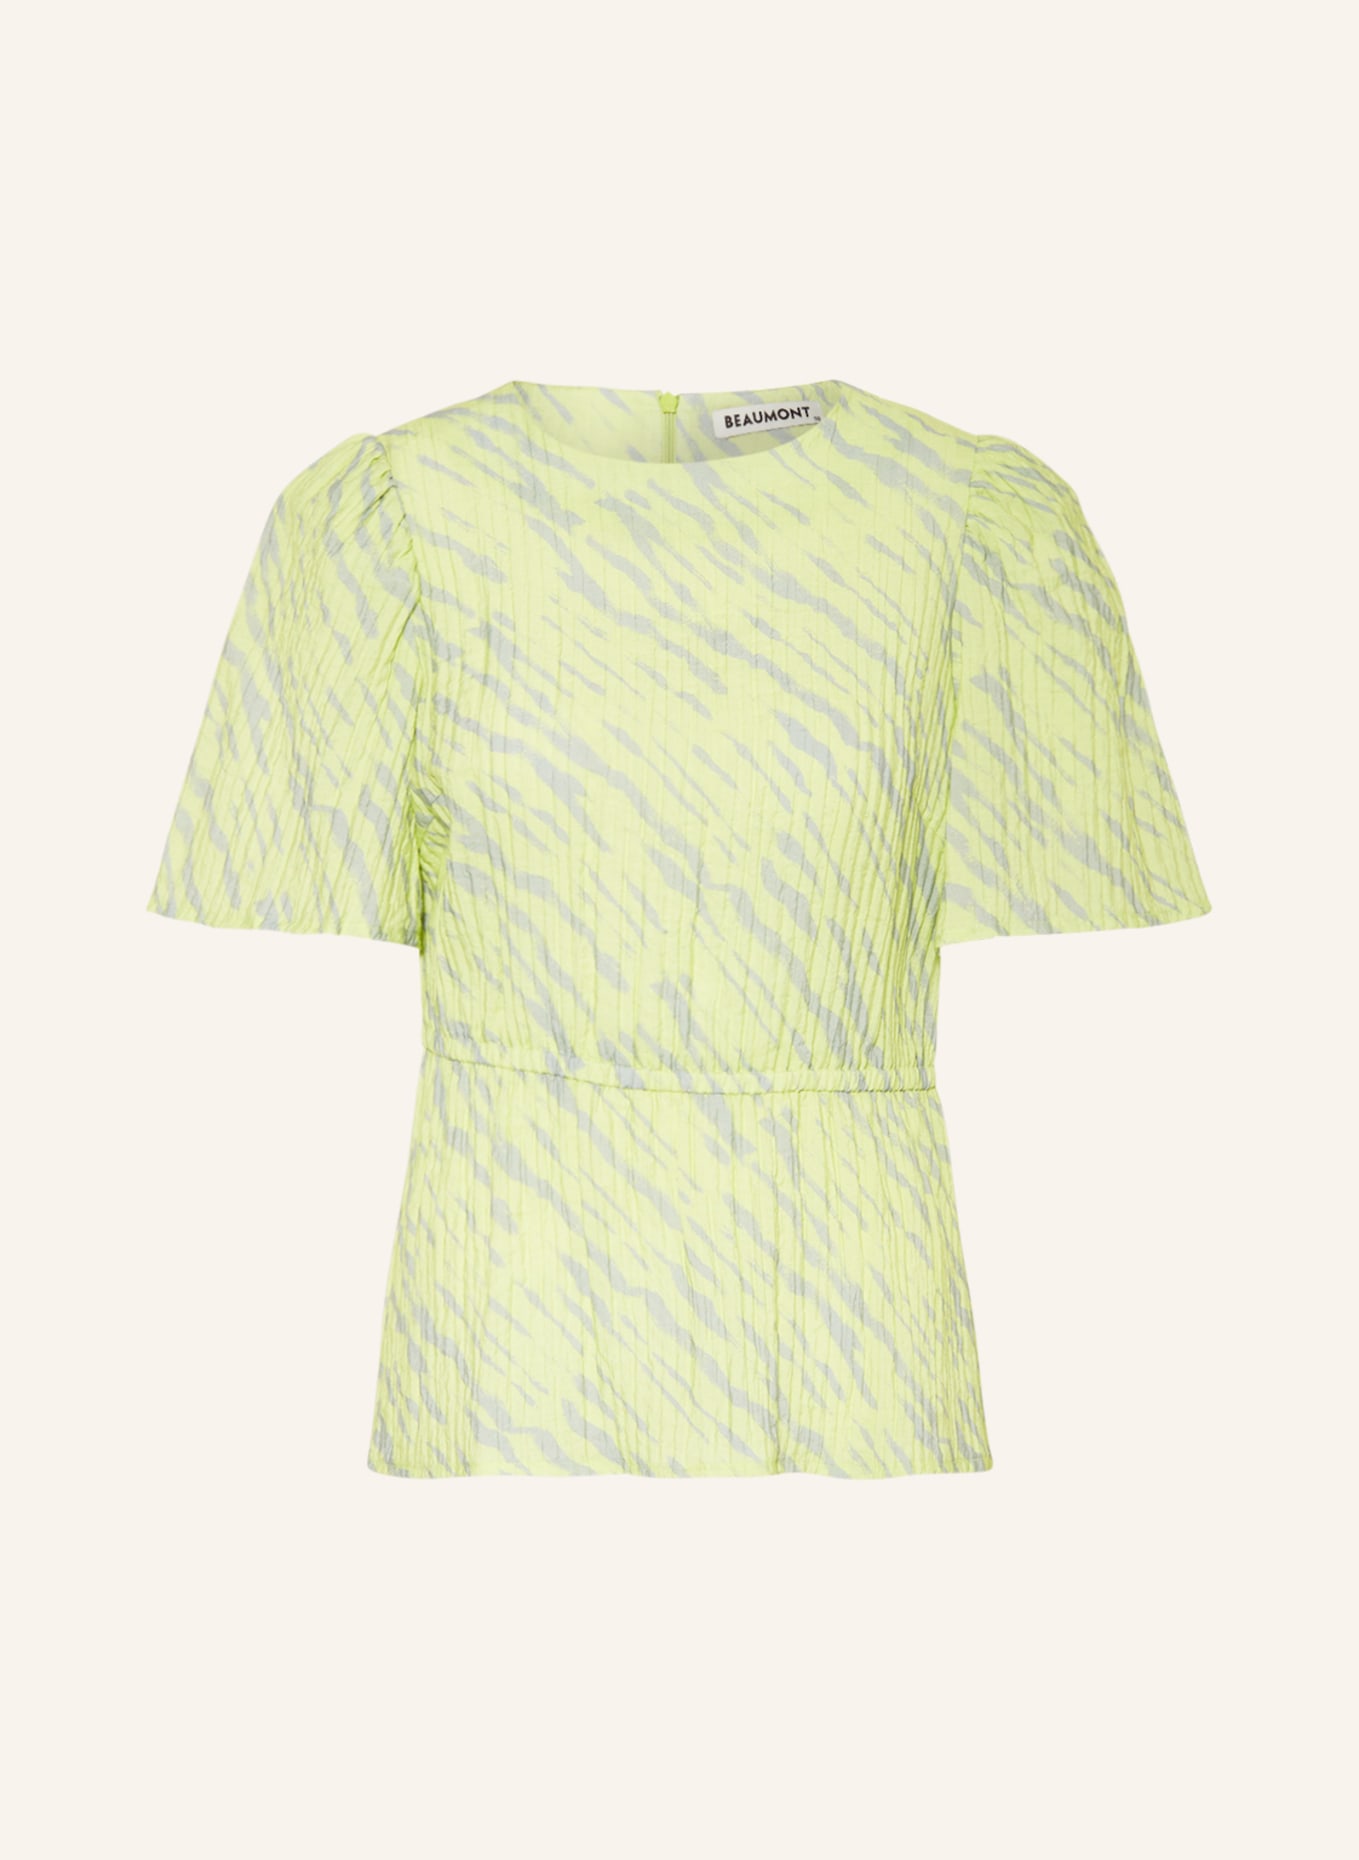 BEAUMONT Shirt blouse ISLA with cut-out, Color: LIGHT GREEN/ BLUE GRAY (Image 1)